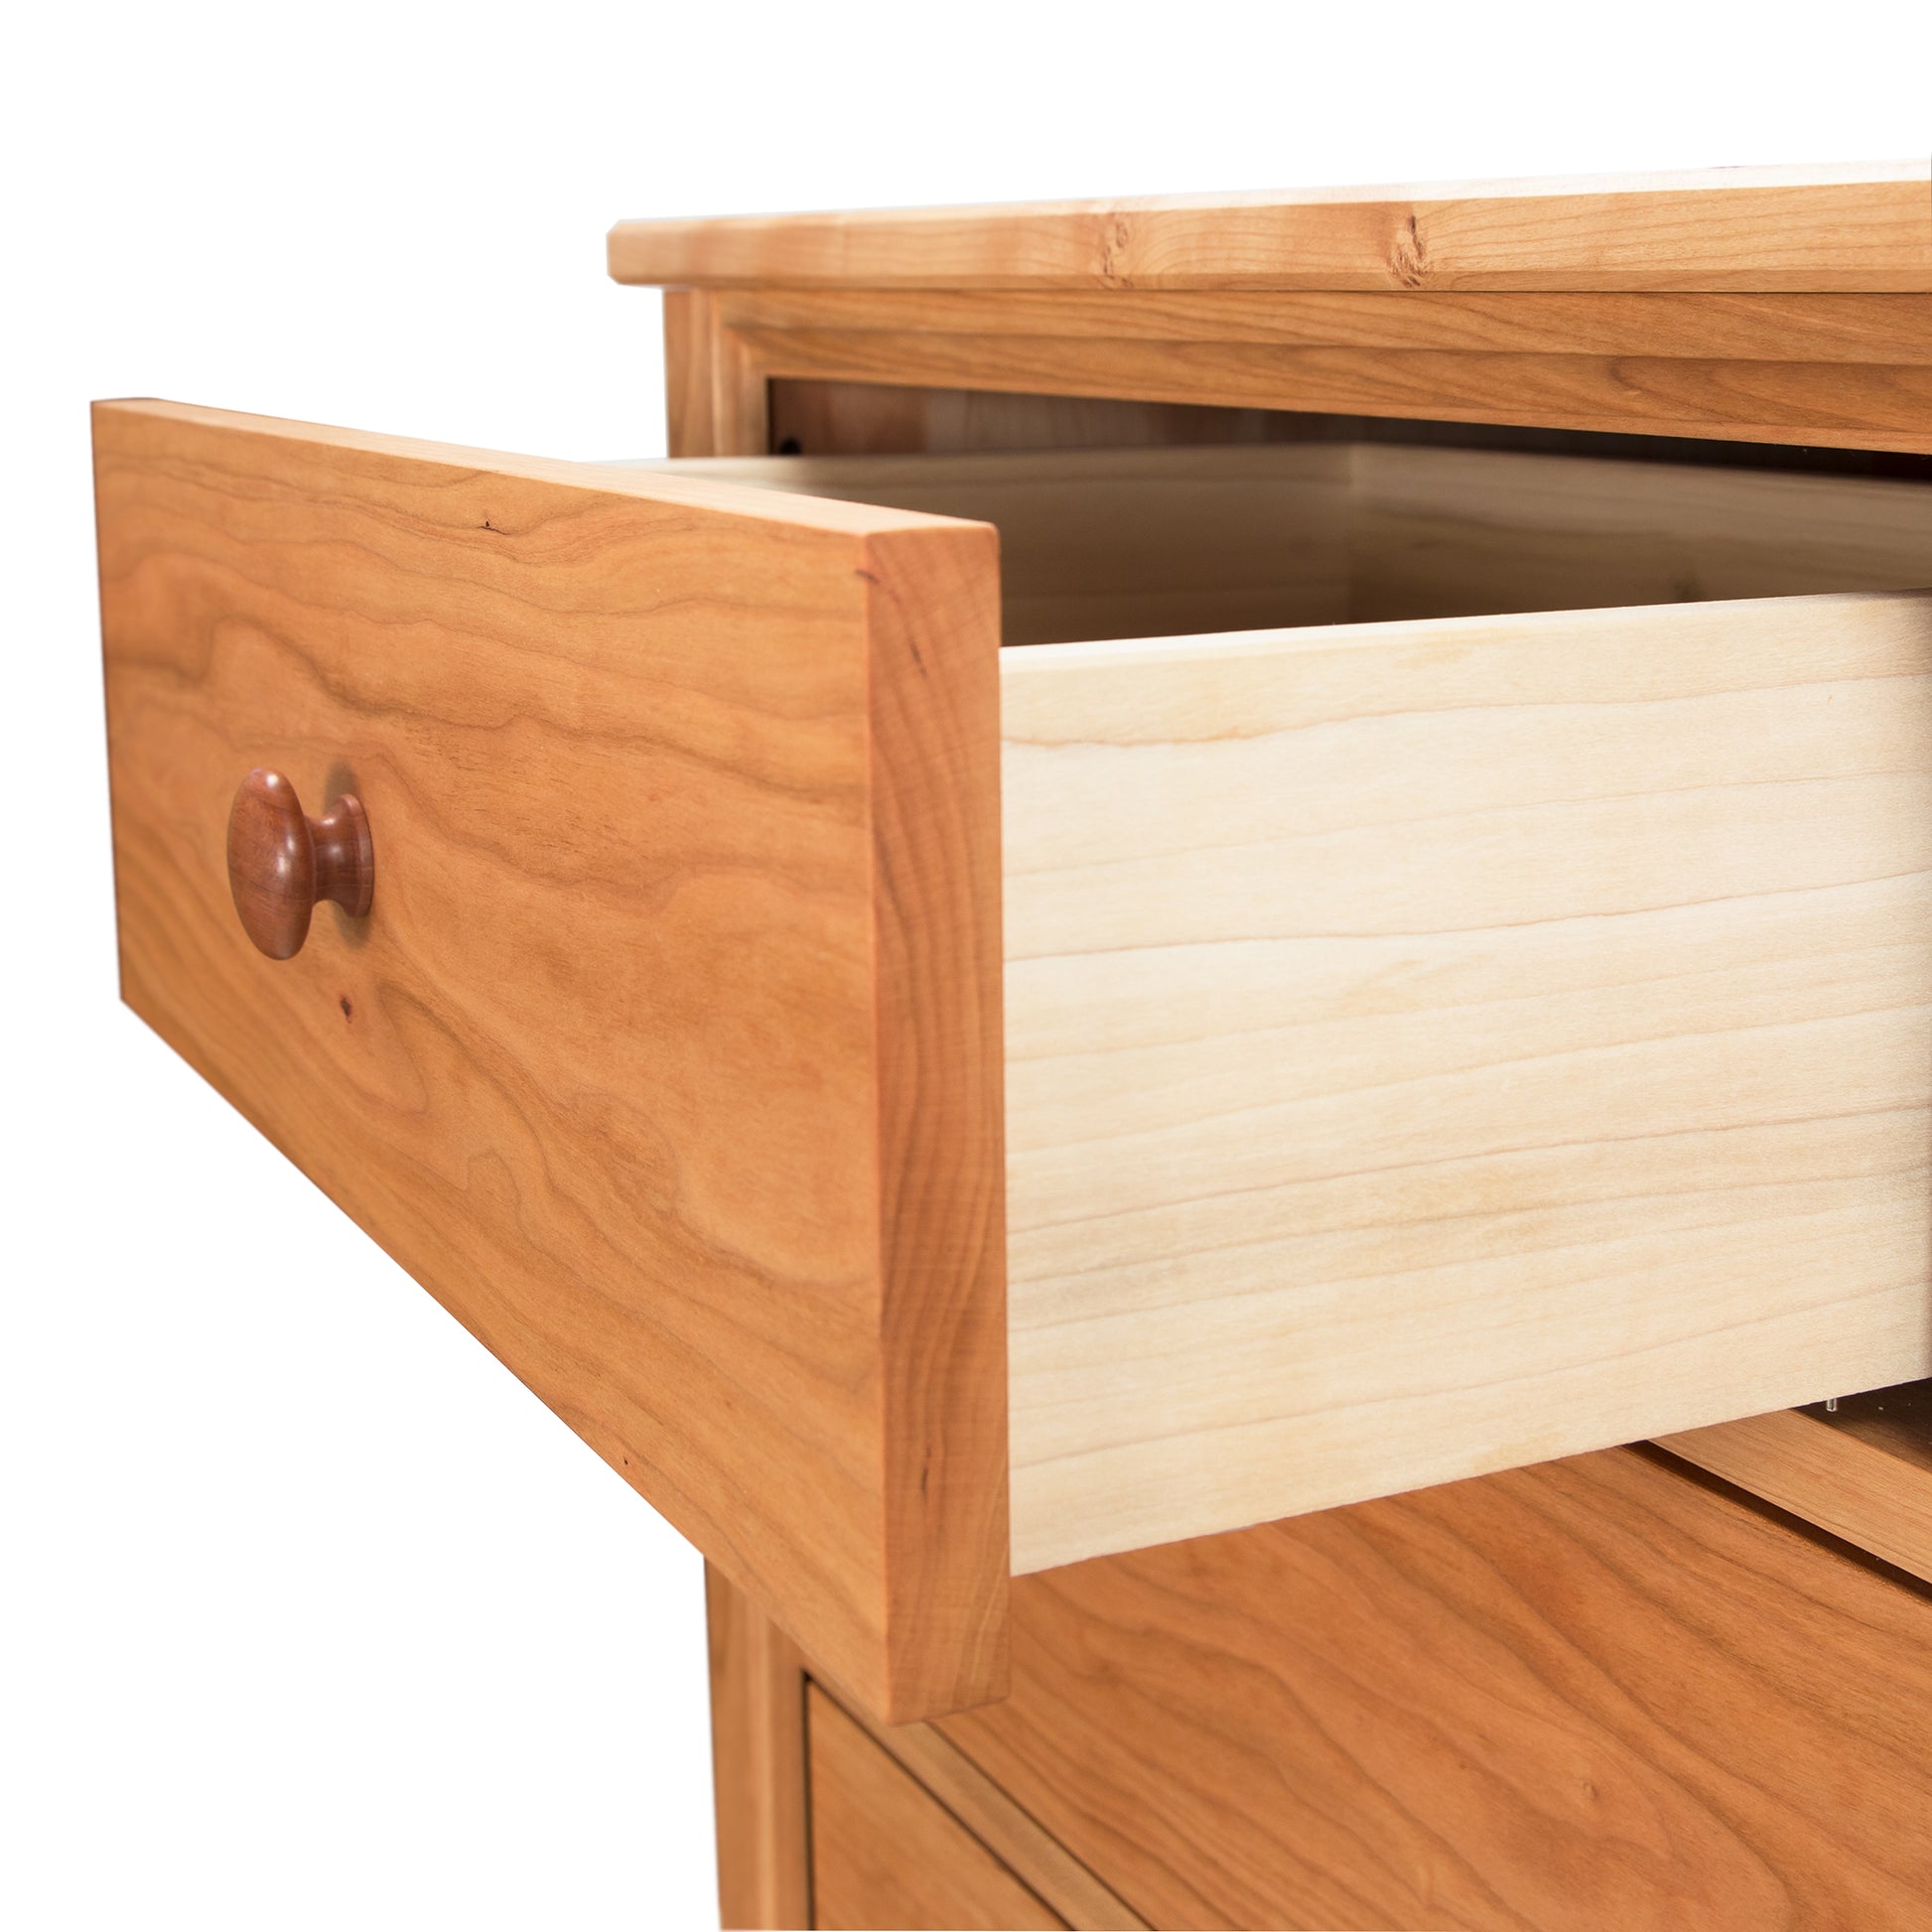 A Vermont Shaker 7-Drawer Dresser by Maple Corner Woodworks with an open drawer, showing the light-colored interior and wooden knob, set against a white background.